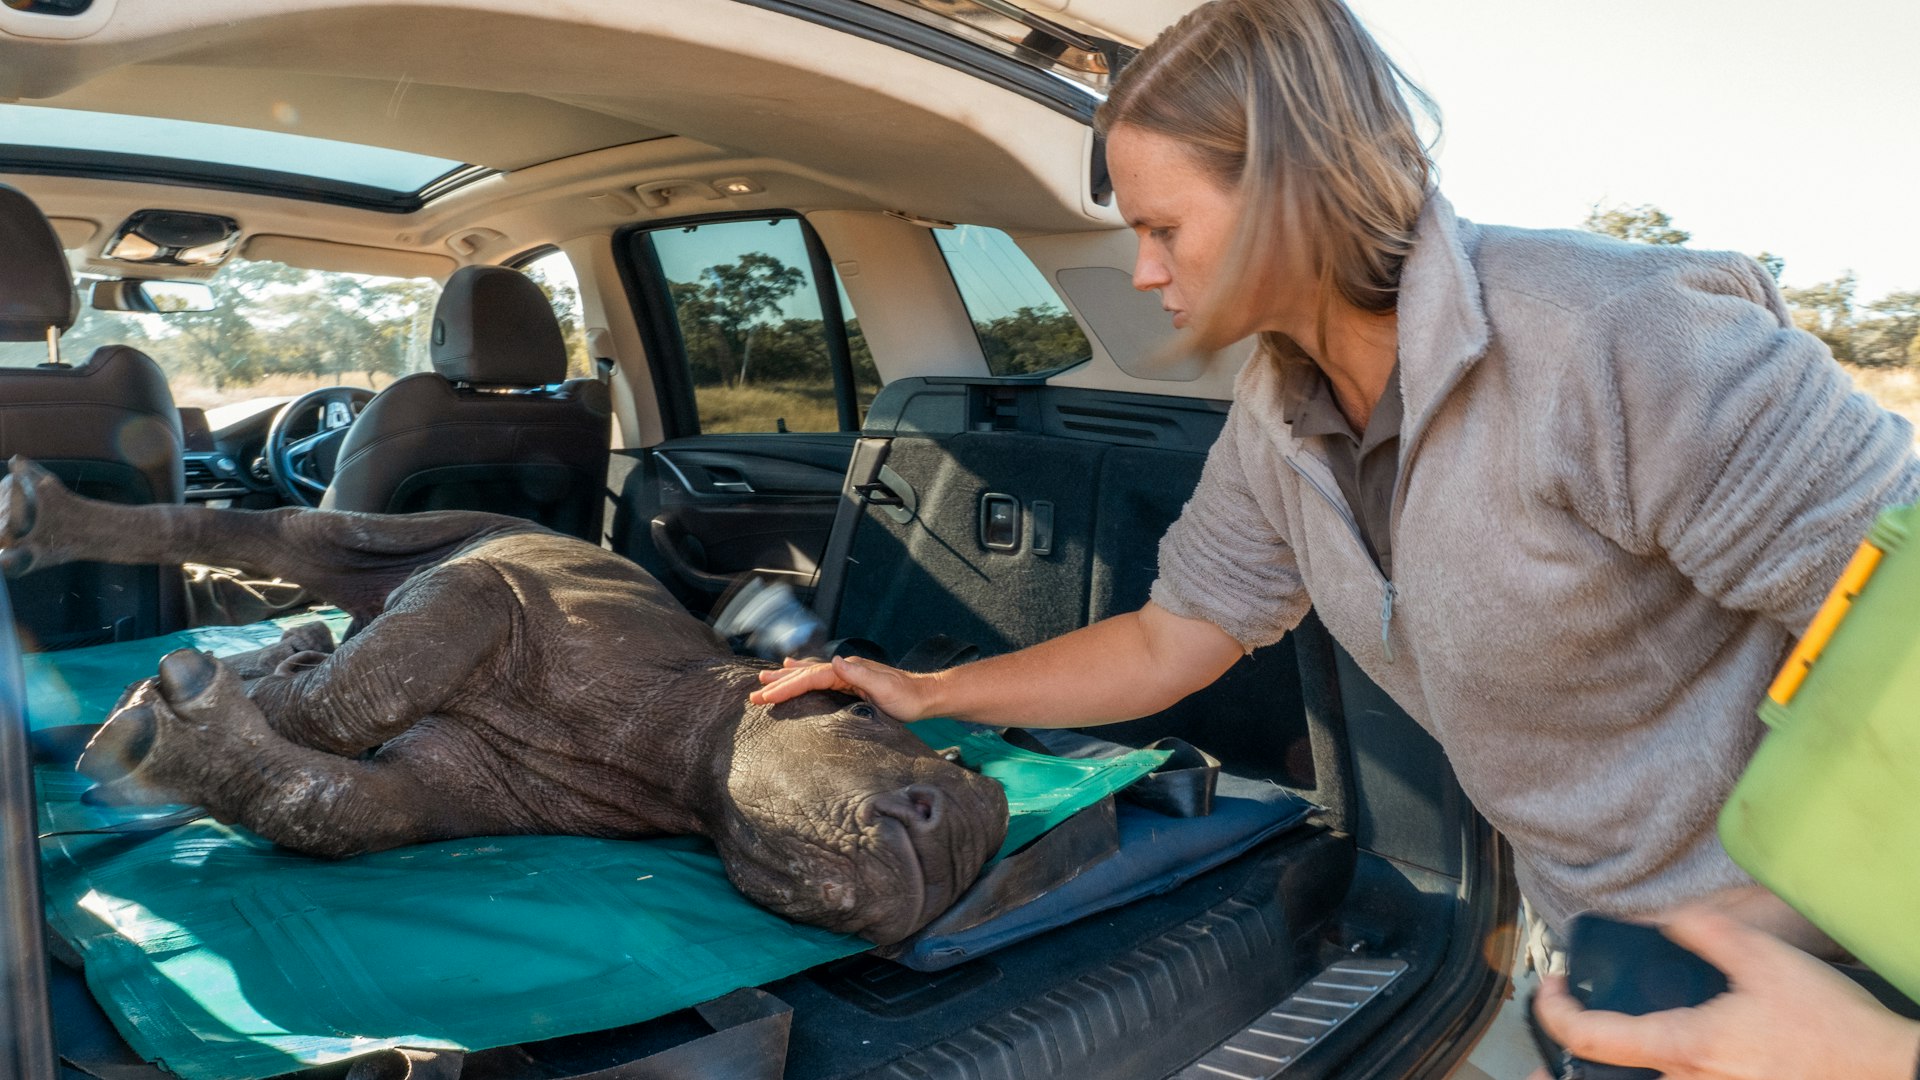 A ranger at Kruger National Park Rhino orphanage gently touches the face of a rhino calf laid in the back of a car